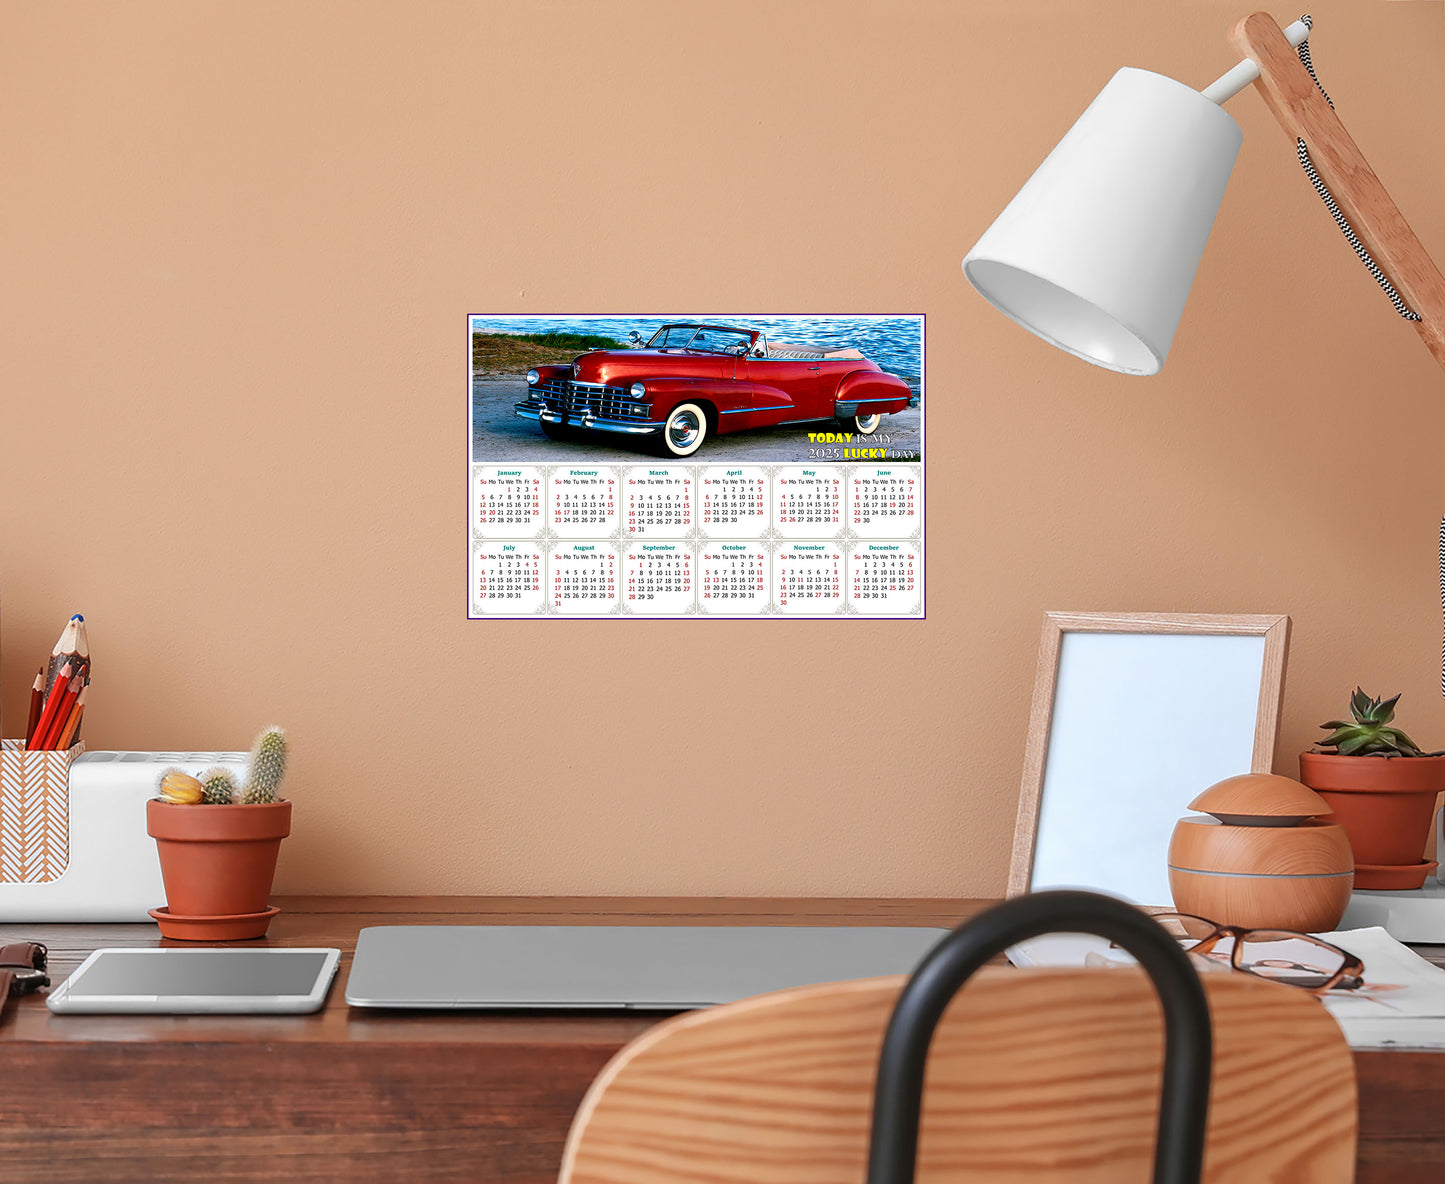 2025 Peel & Stick Calendar - Today is my Lucky Day - Removable, Repositionable - 044 (9"x 6")